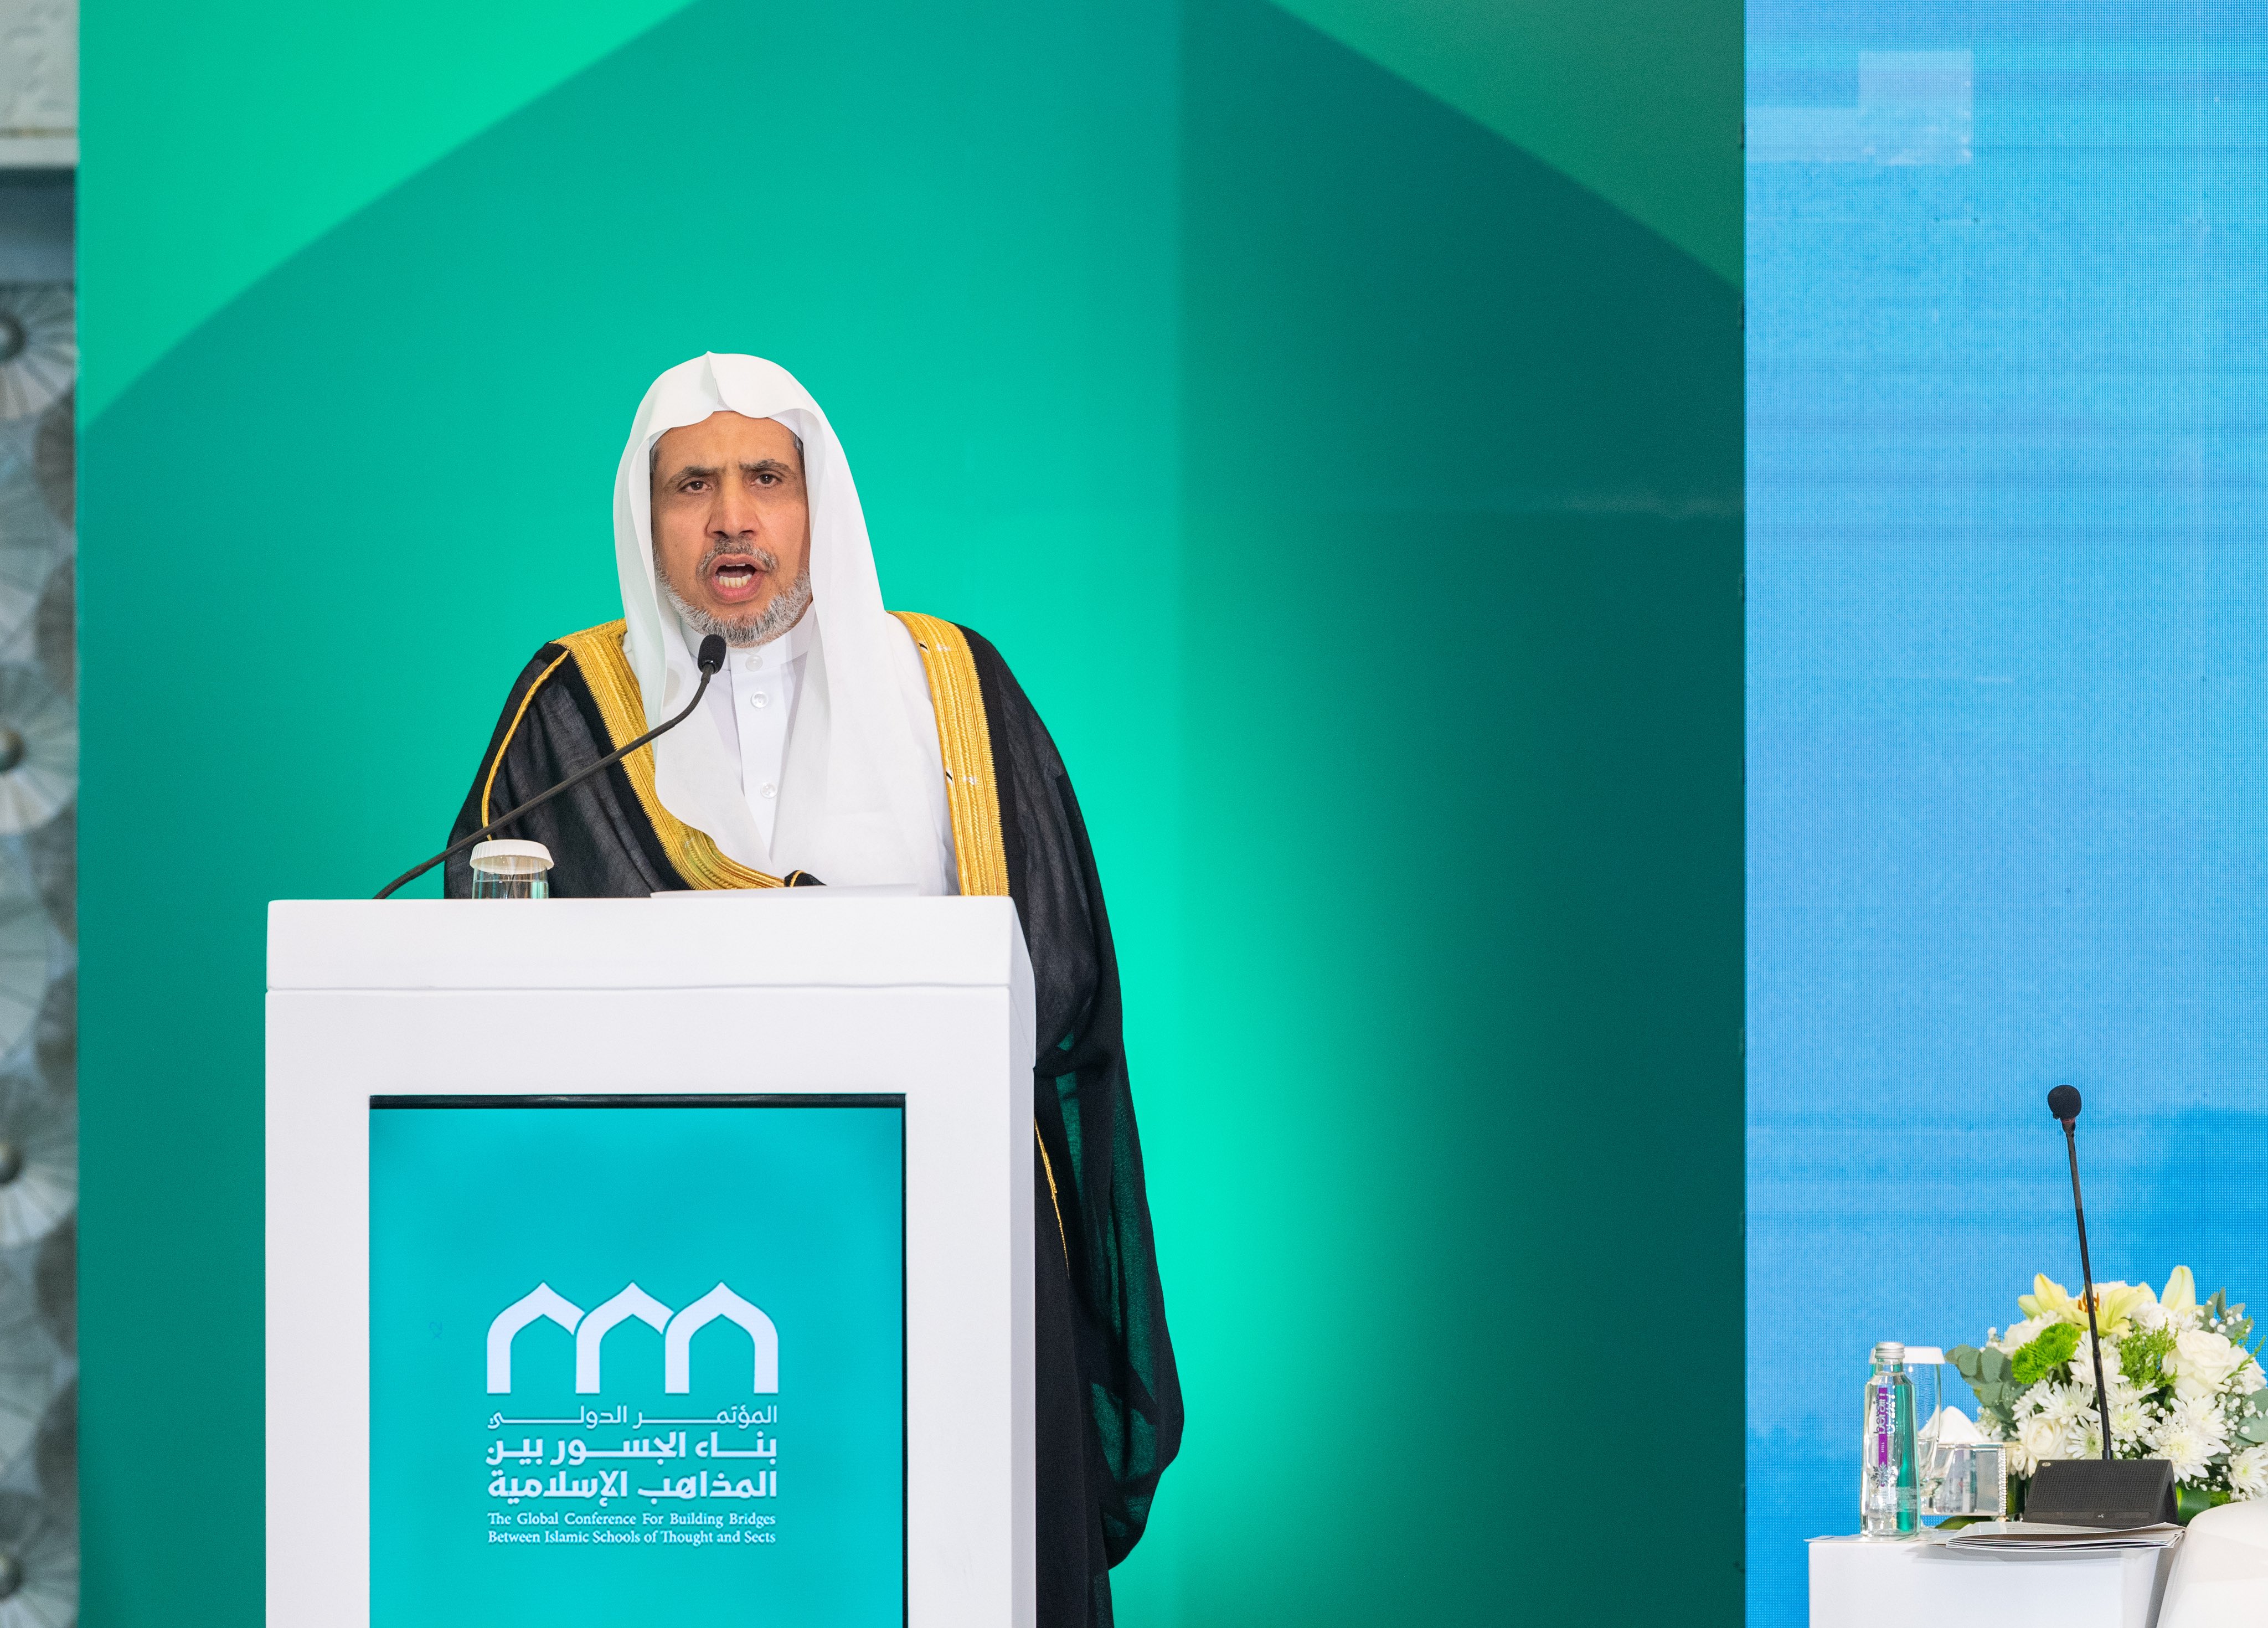 His Excellency Sheikh Dr. Mohammed Al-Issa, Secretary-General of the MWL and Chairman of the Organization of Muslim Scholars, at the opening ceremony at the Global Conference for Building Bridges between Islamic Schools of Thought and Sects: